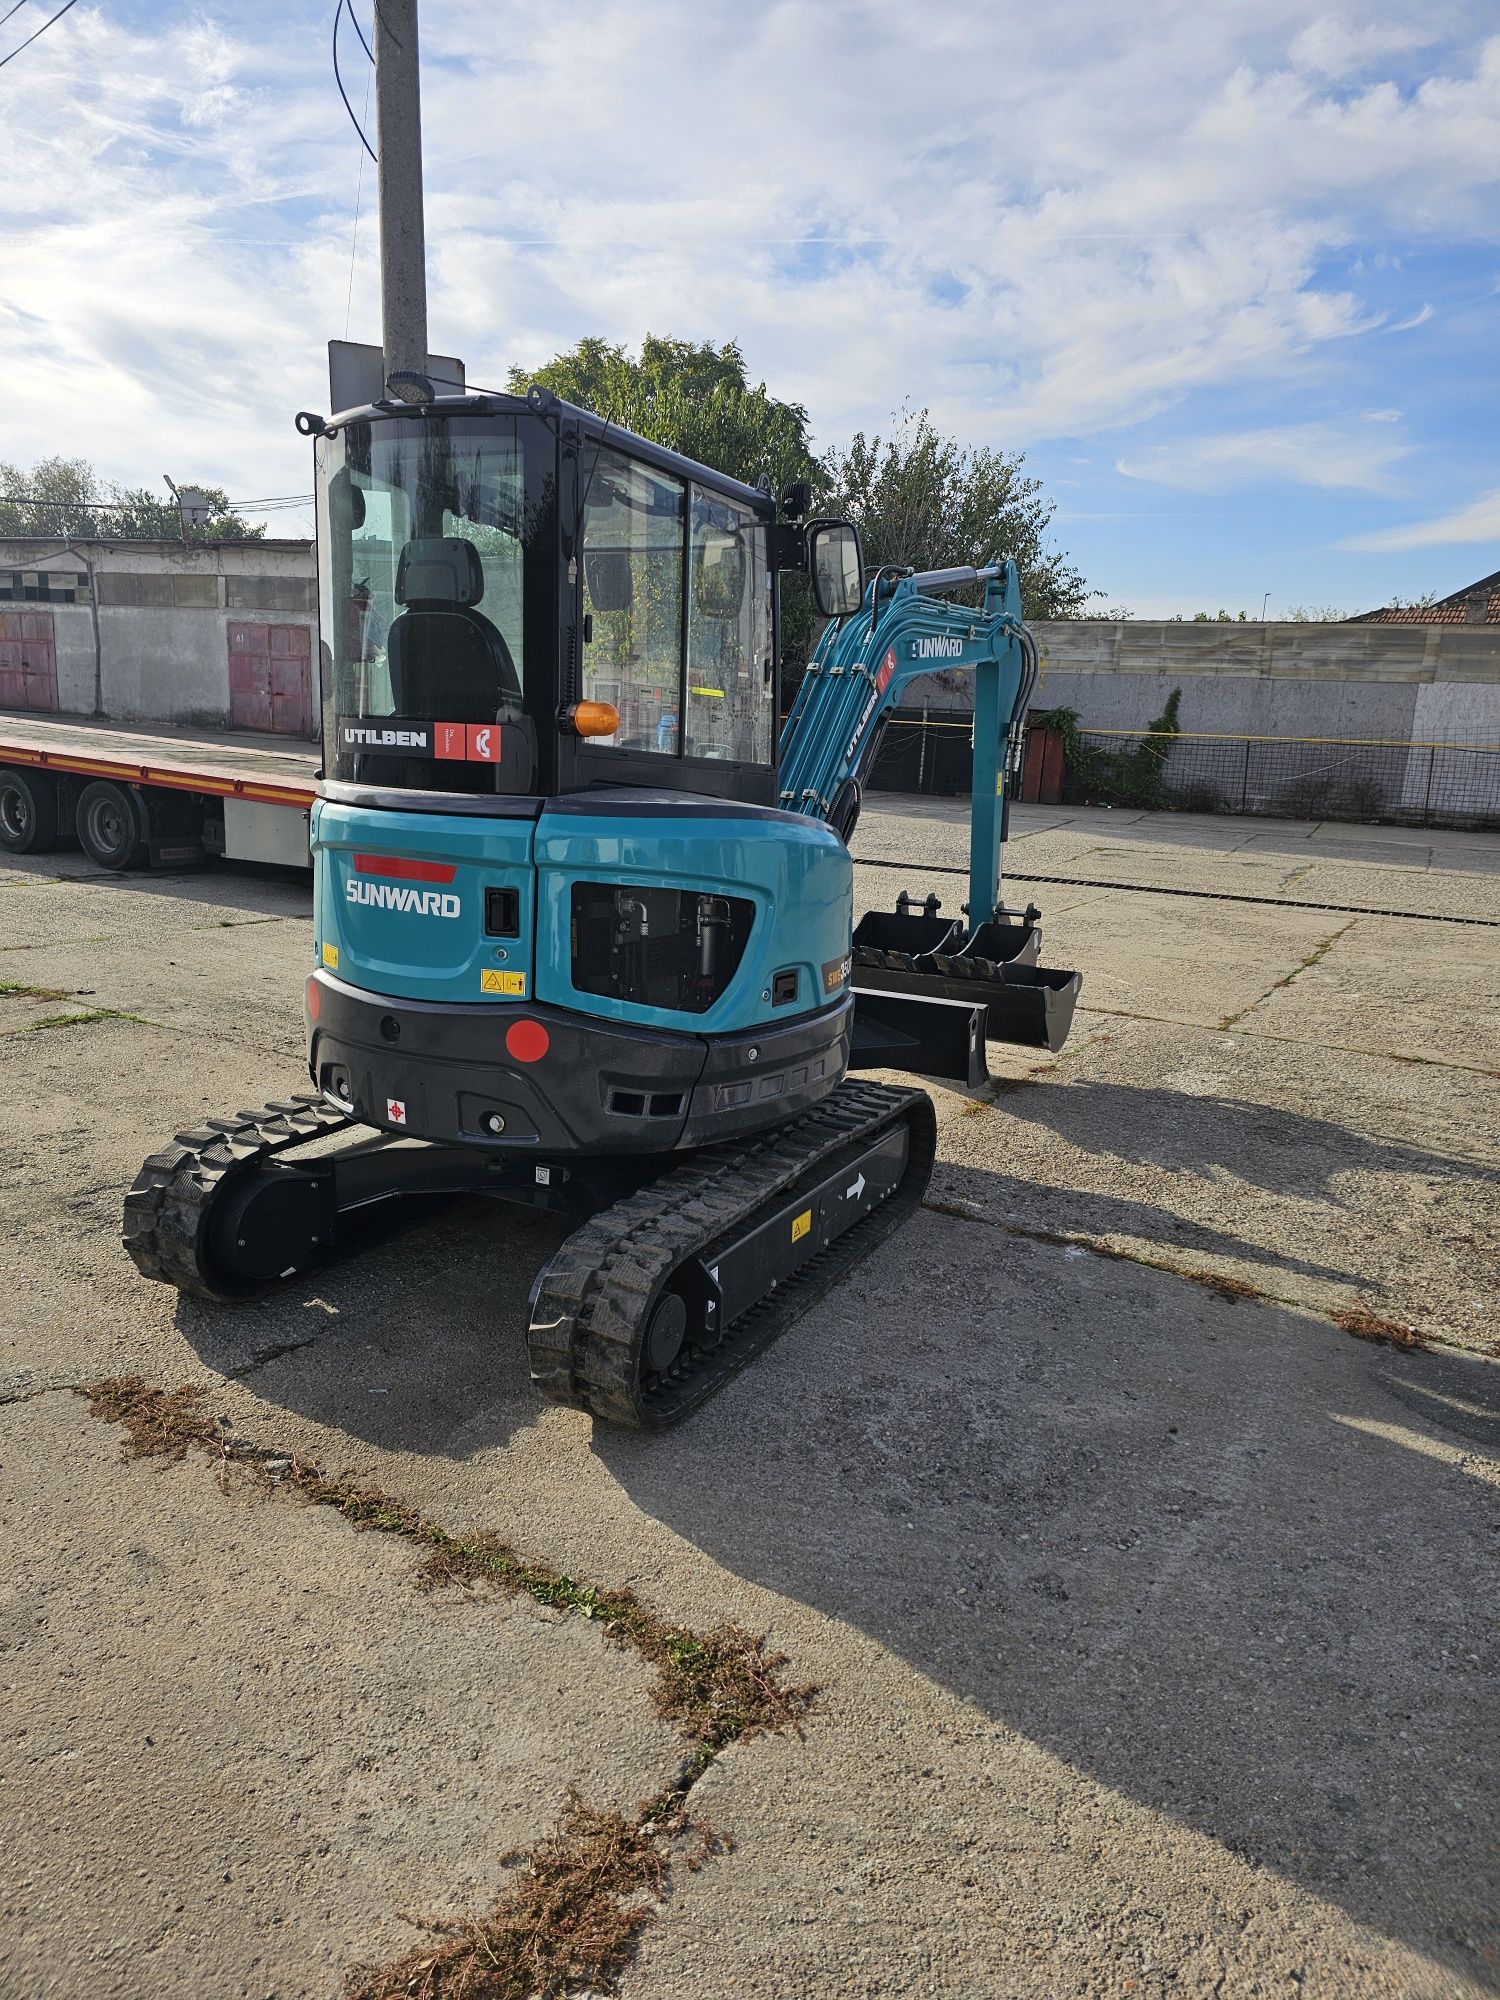 Minidigger for rent 4 tone with all inclusive